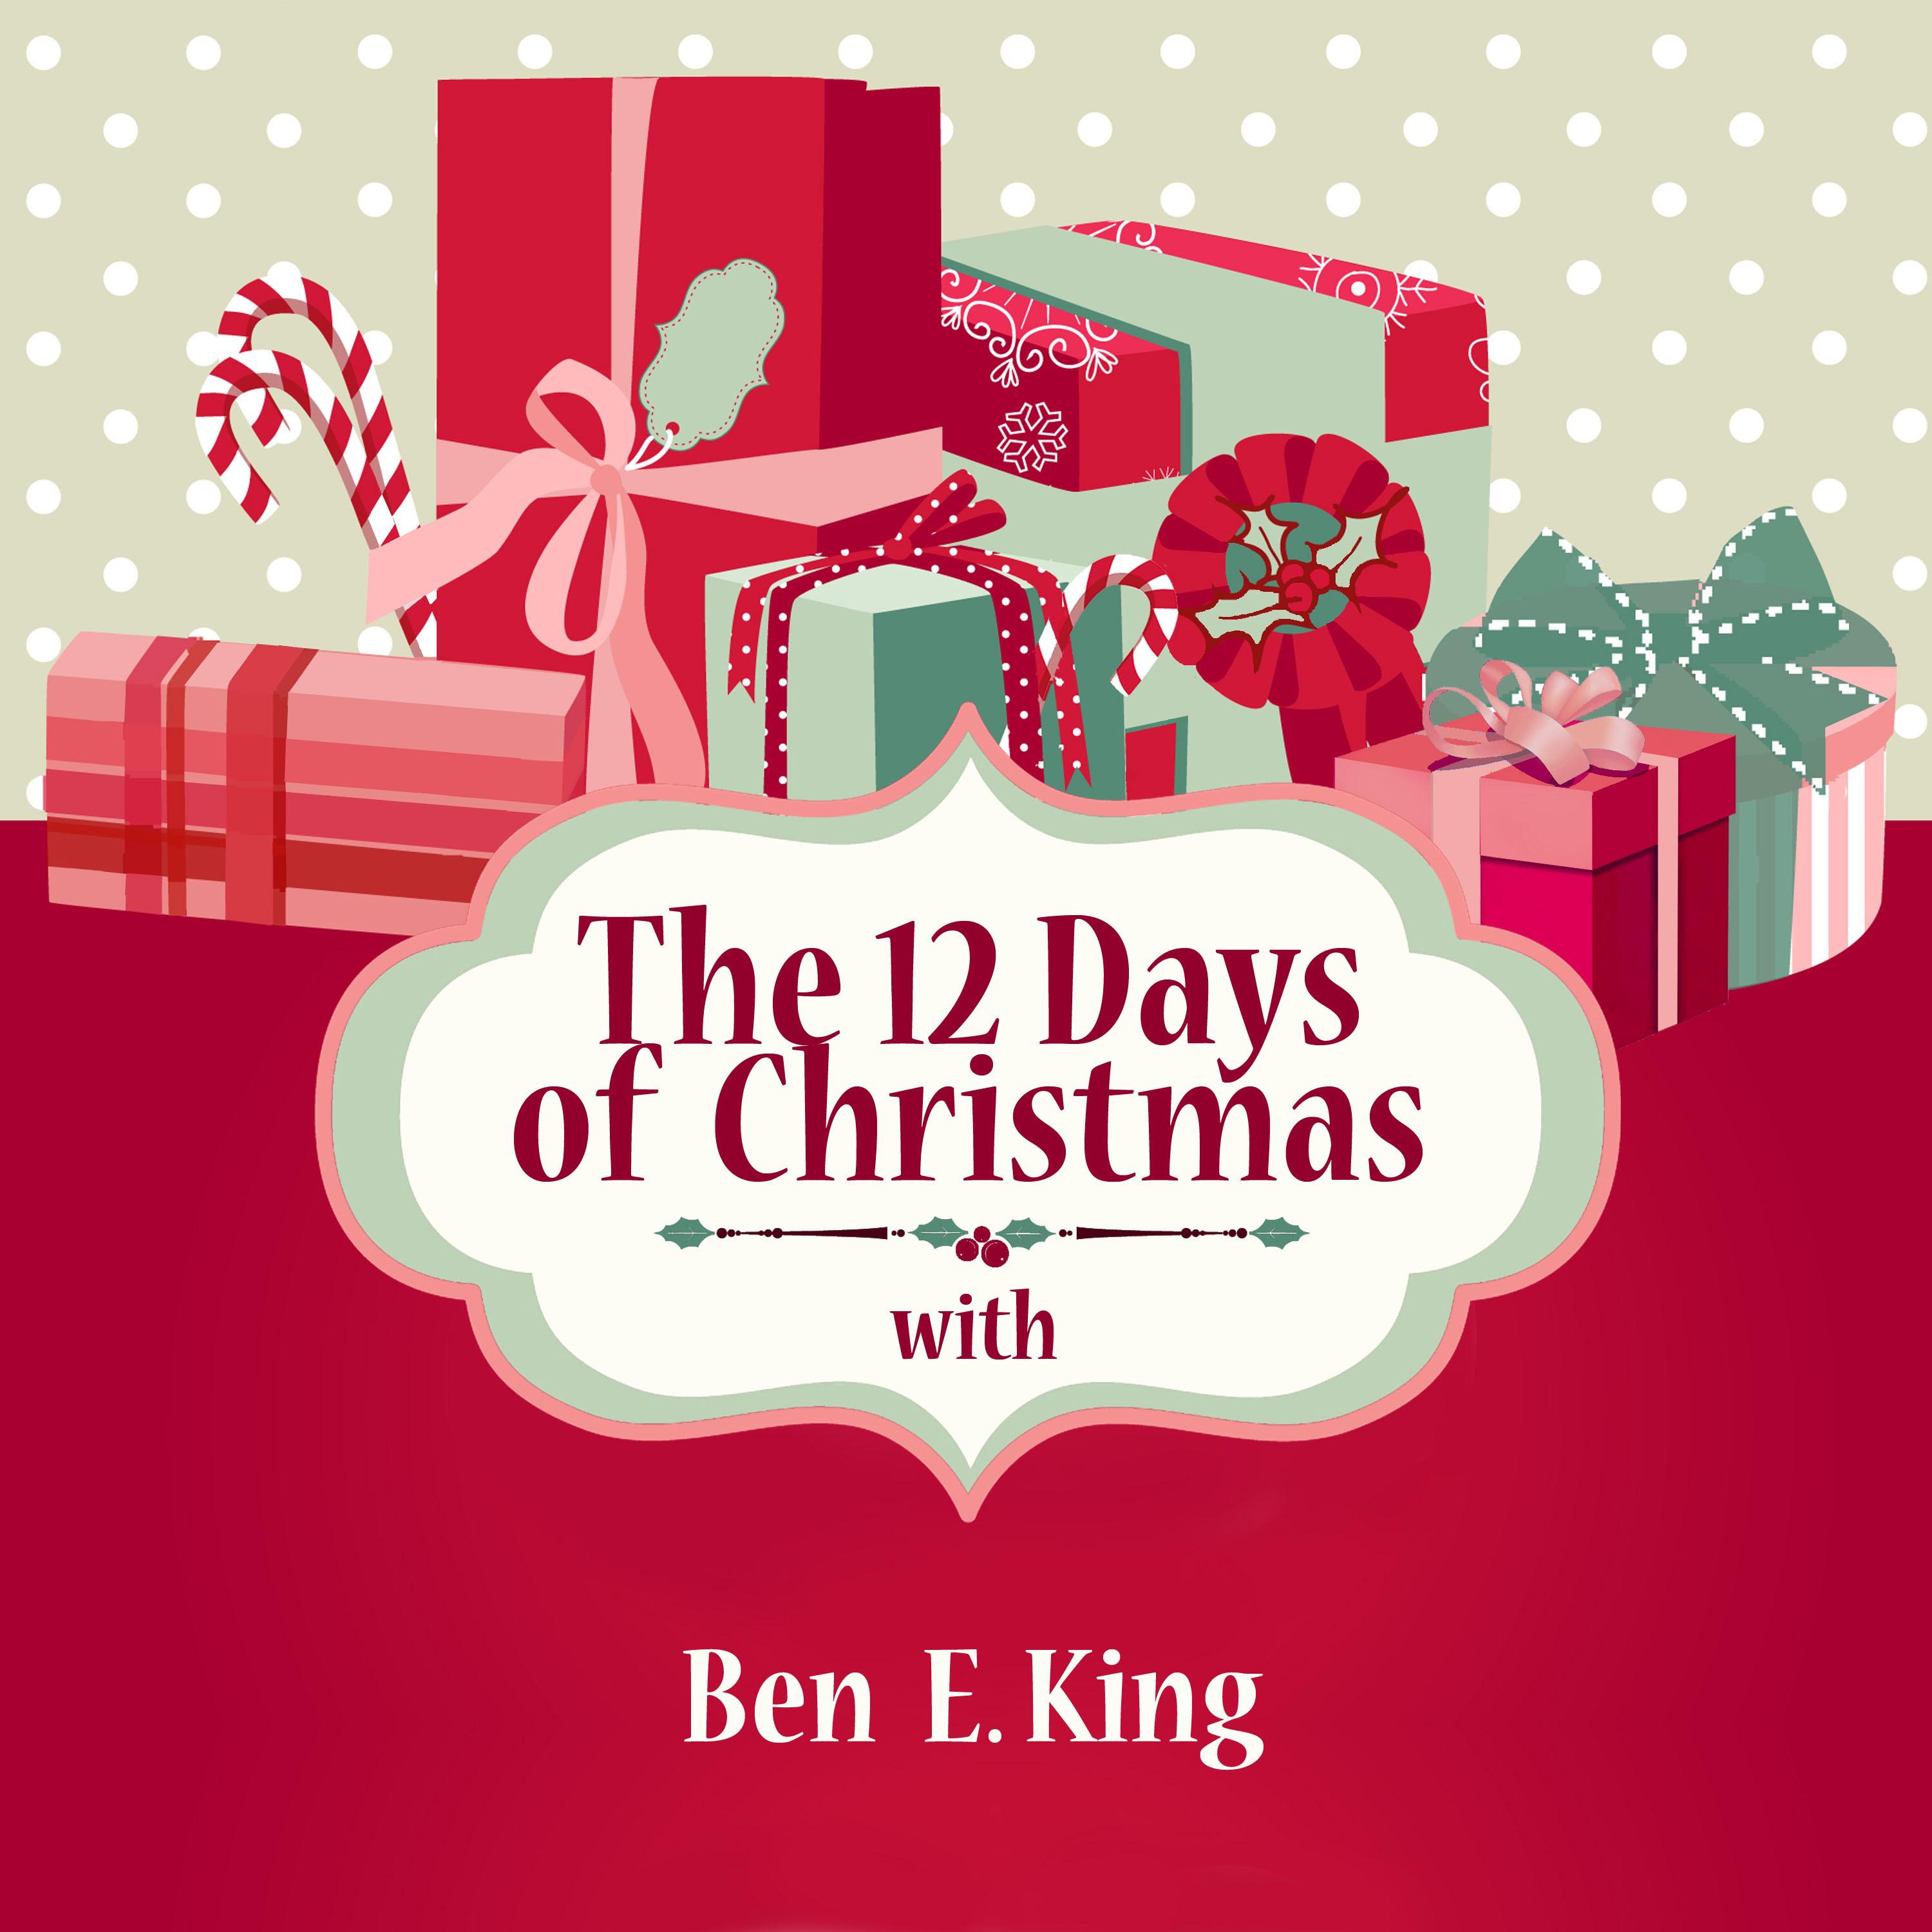 The 12 Days of Christmas with Ben E. King